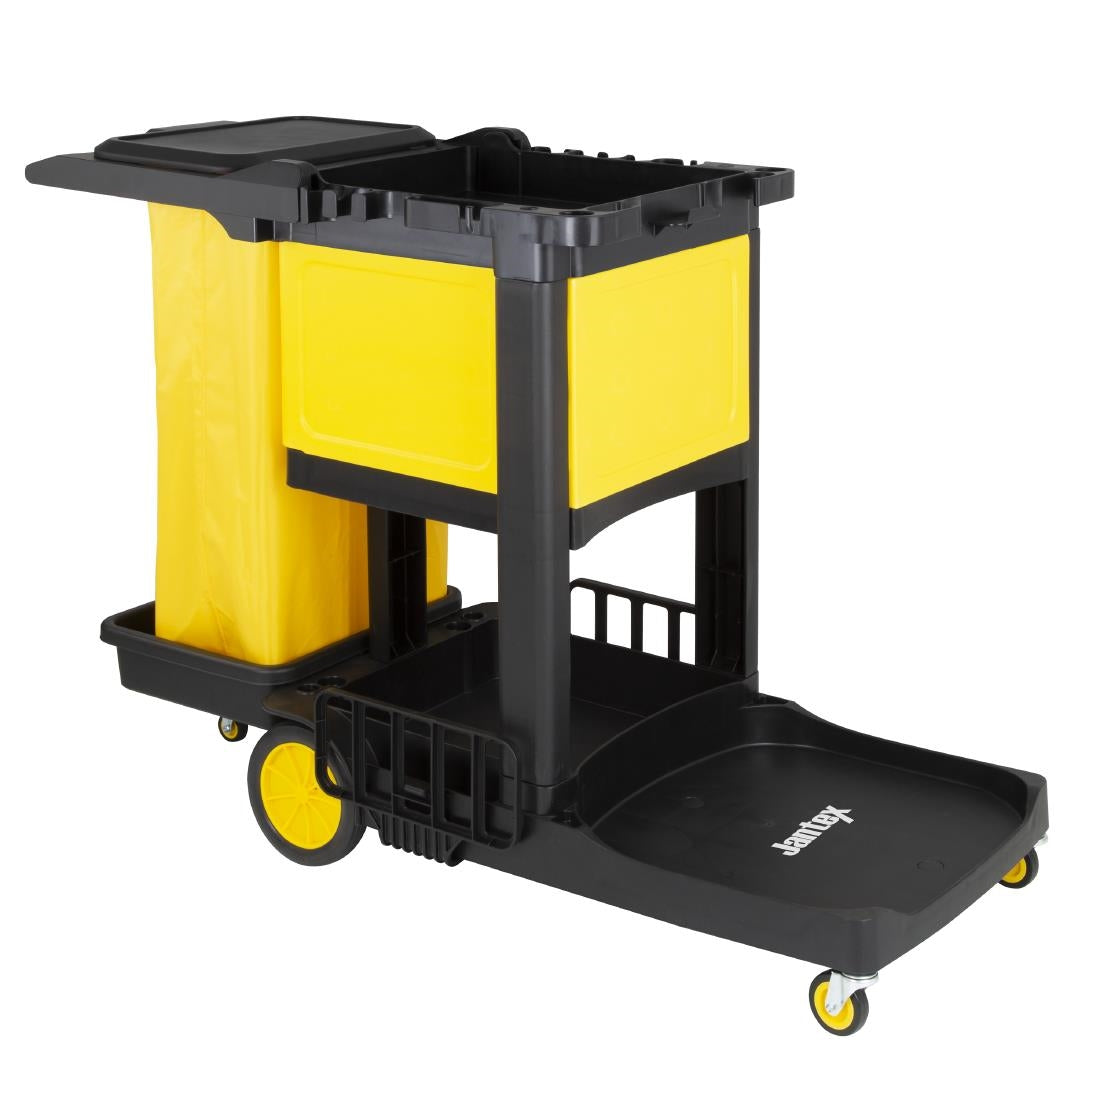 FU998 Jantex Cleaning Trolley Black with Lockable Cabinet